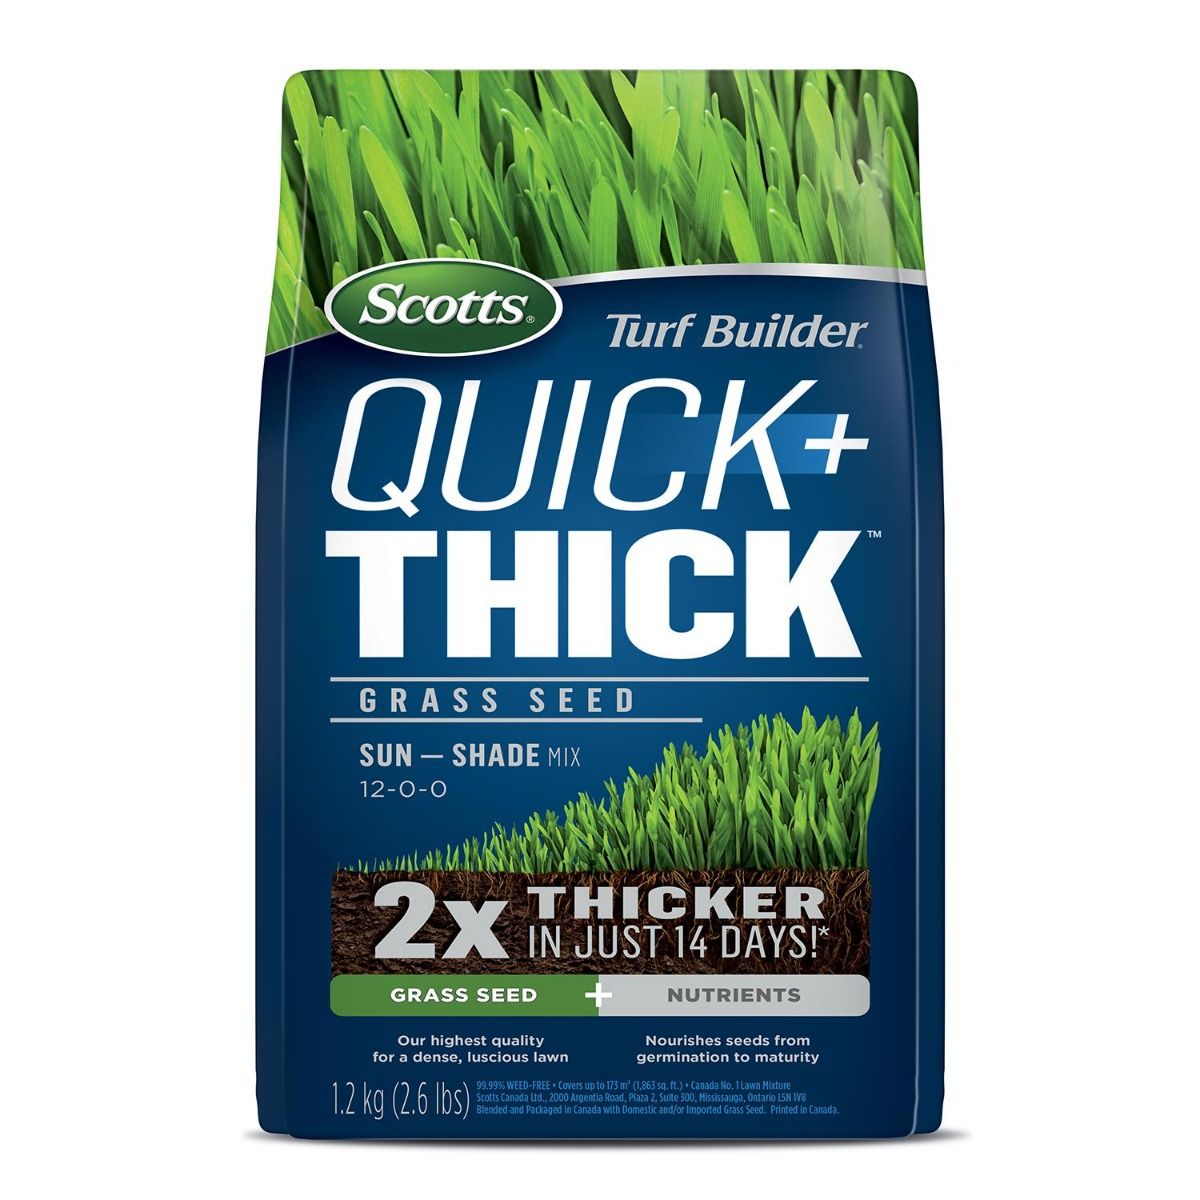 Scotts Turf Builder Quick + Thick Grass Seed Sun-Shade Mix (12-0-0) - 1.2kg